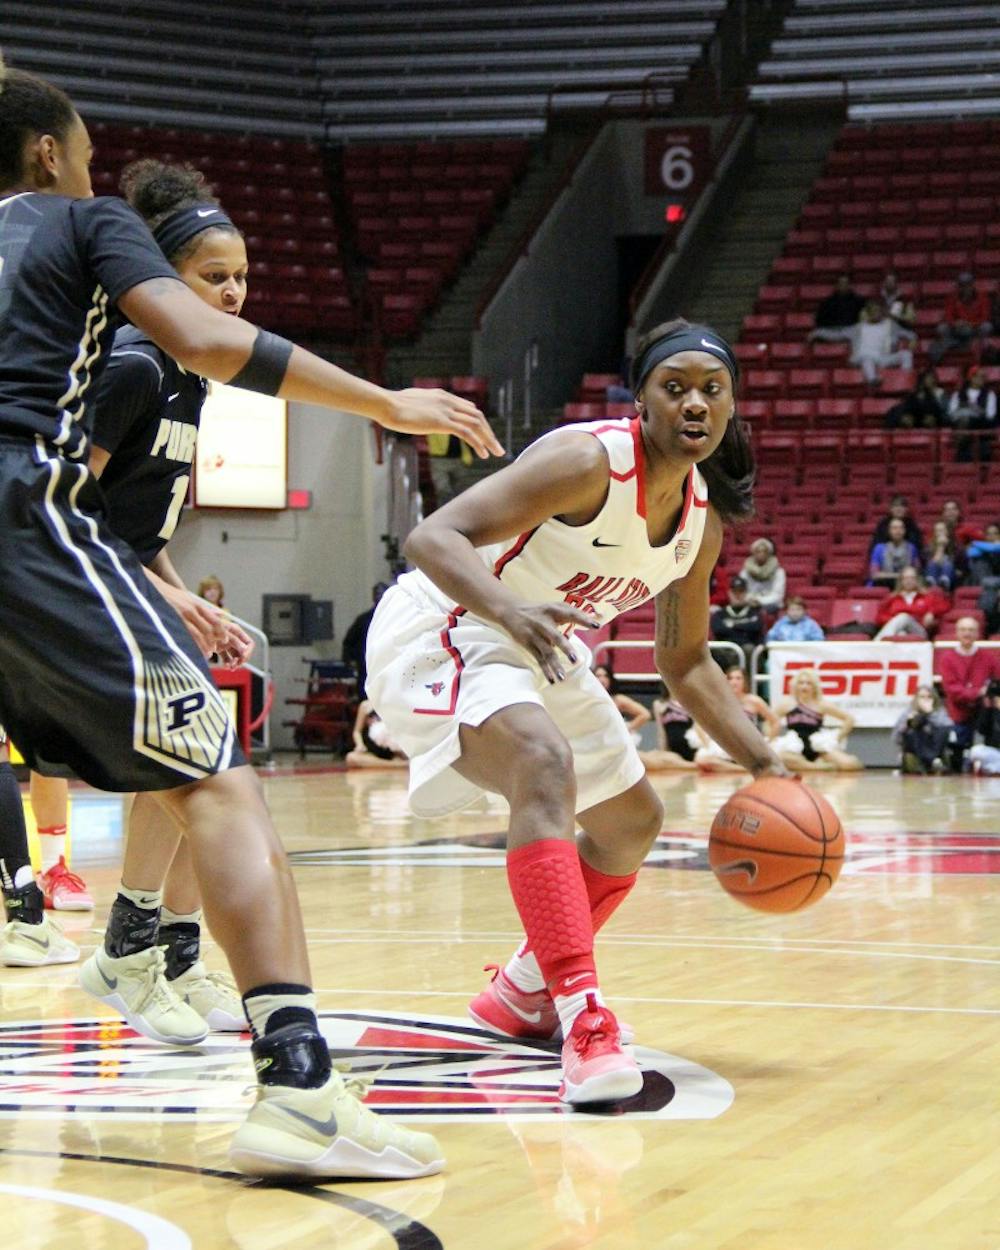 Guard Frannie Frazier drives the ball in during the Cardinals’ game against Purdue on Dec. 8 in Worthen Arena. Paige Grider, DN File